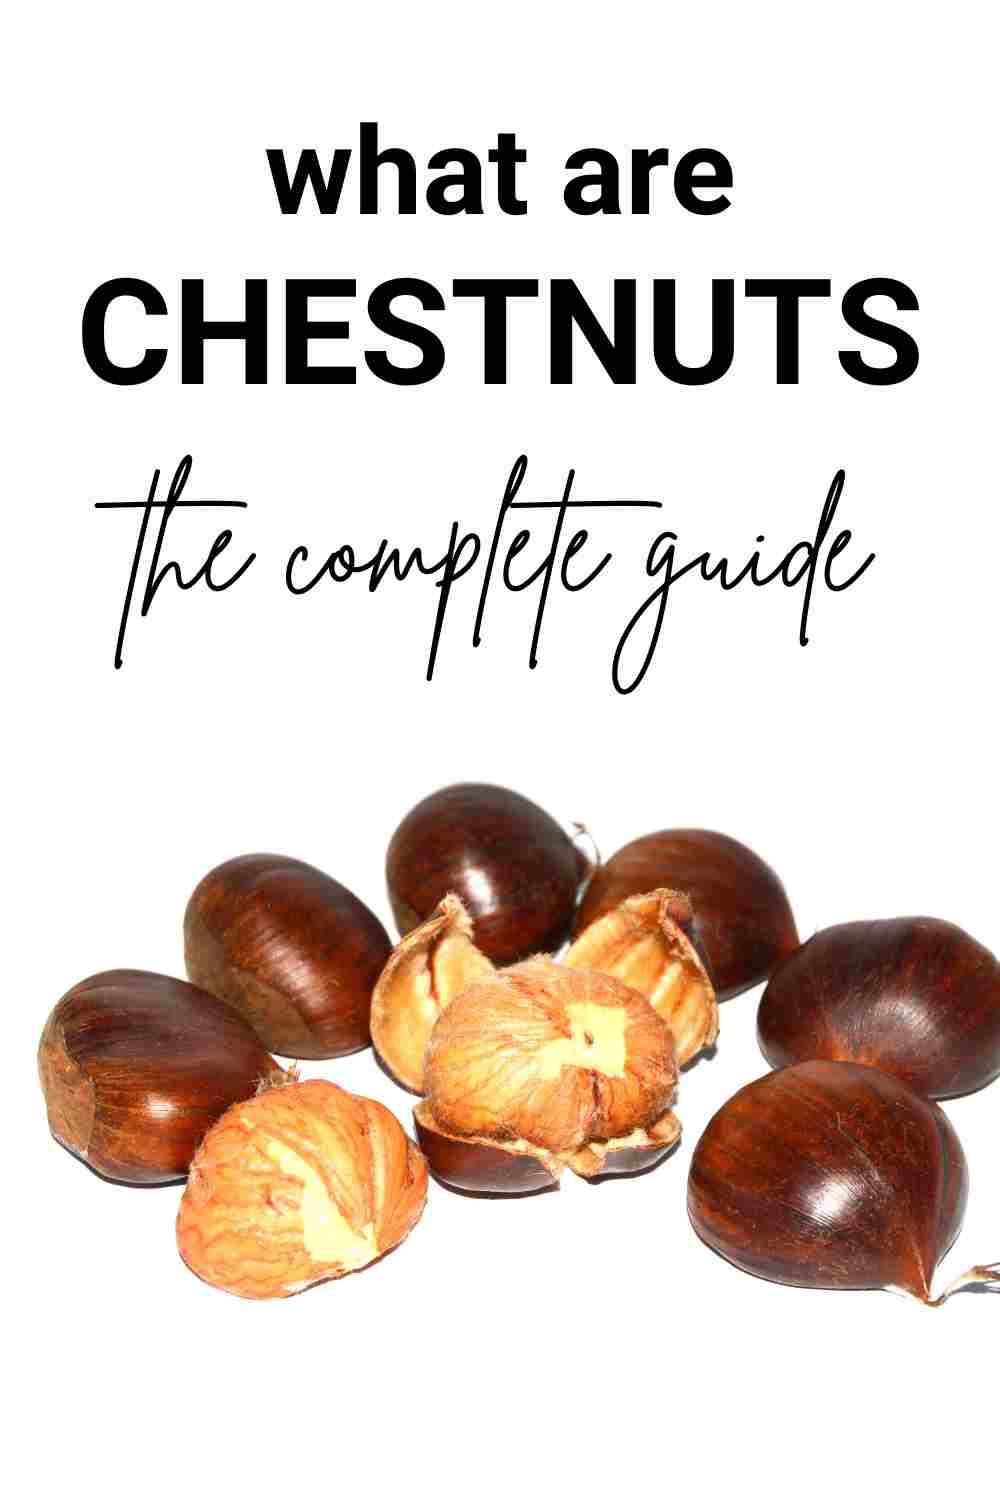 bunch of chestnuts. text reads: what are chestnuts the complete guide